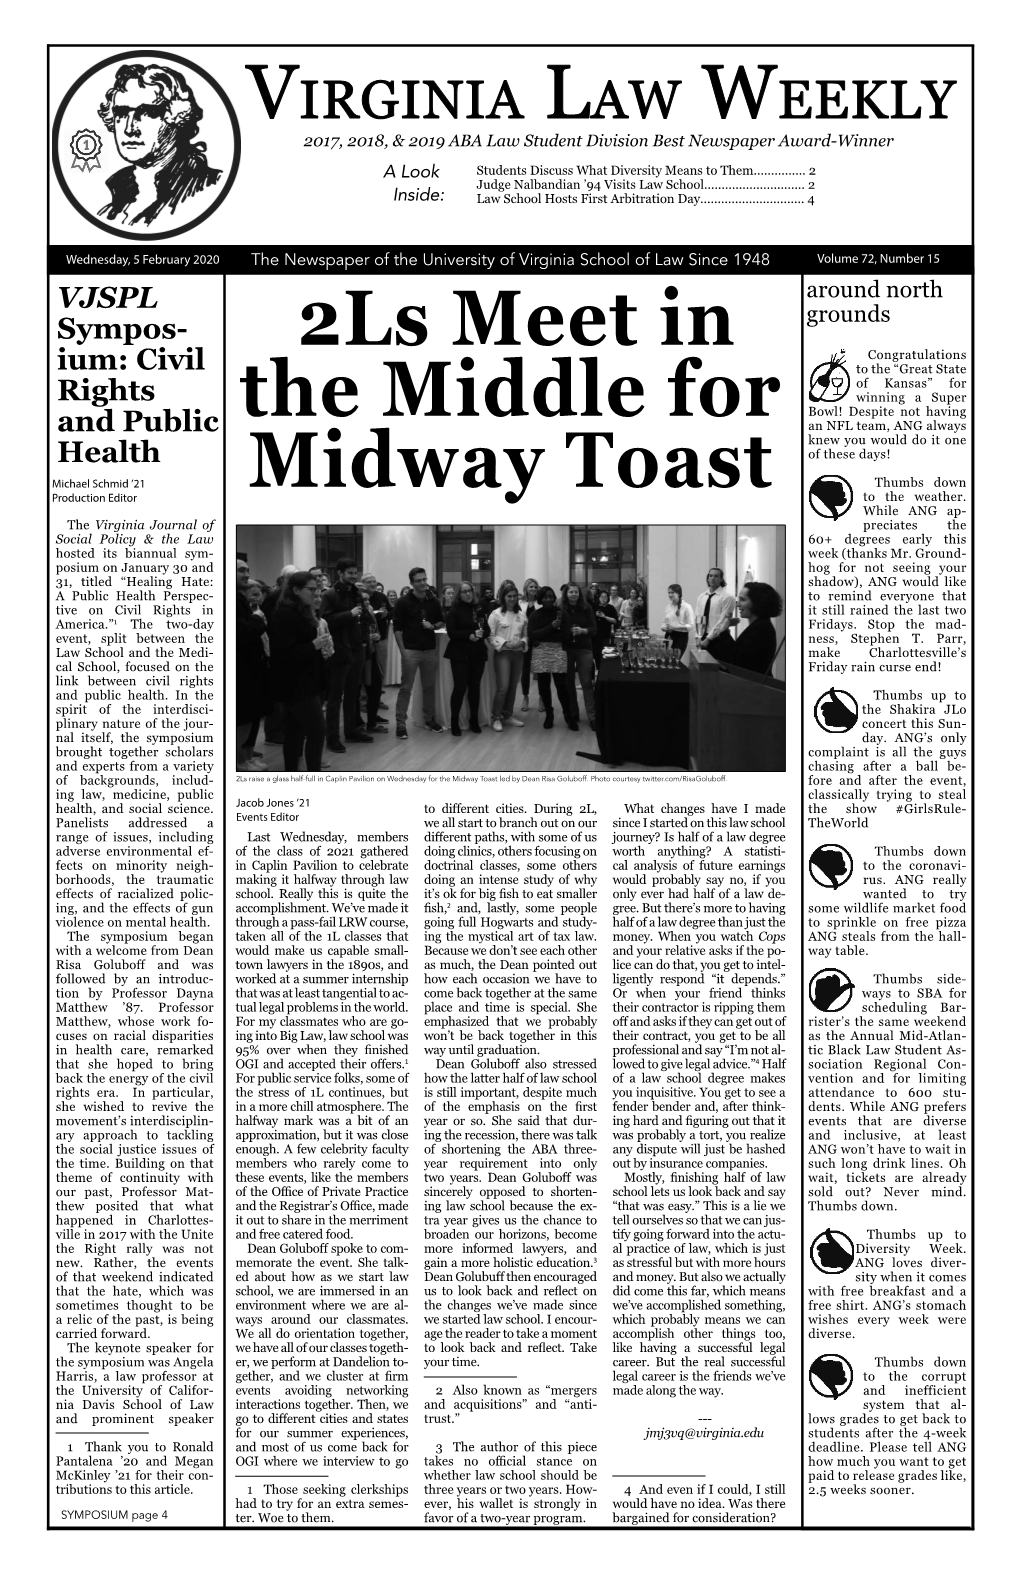 2Ls Meet in the Middle for Midway Toast